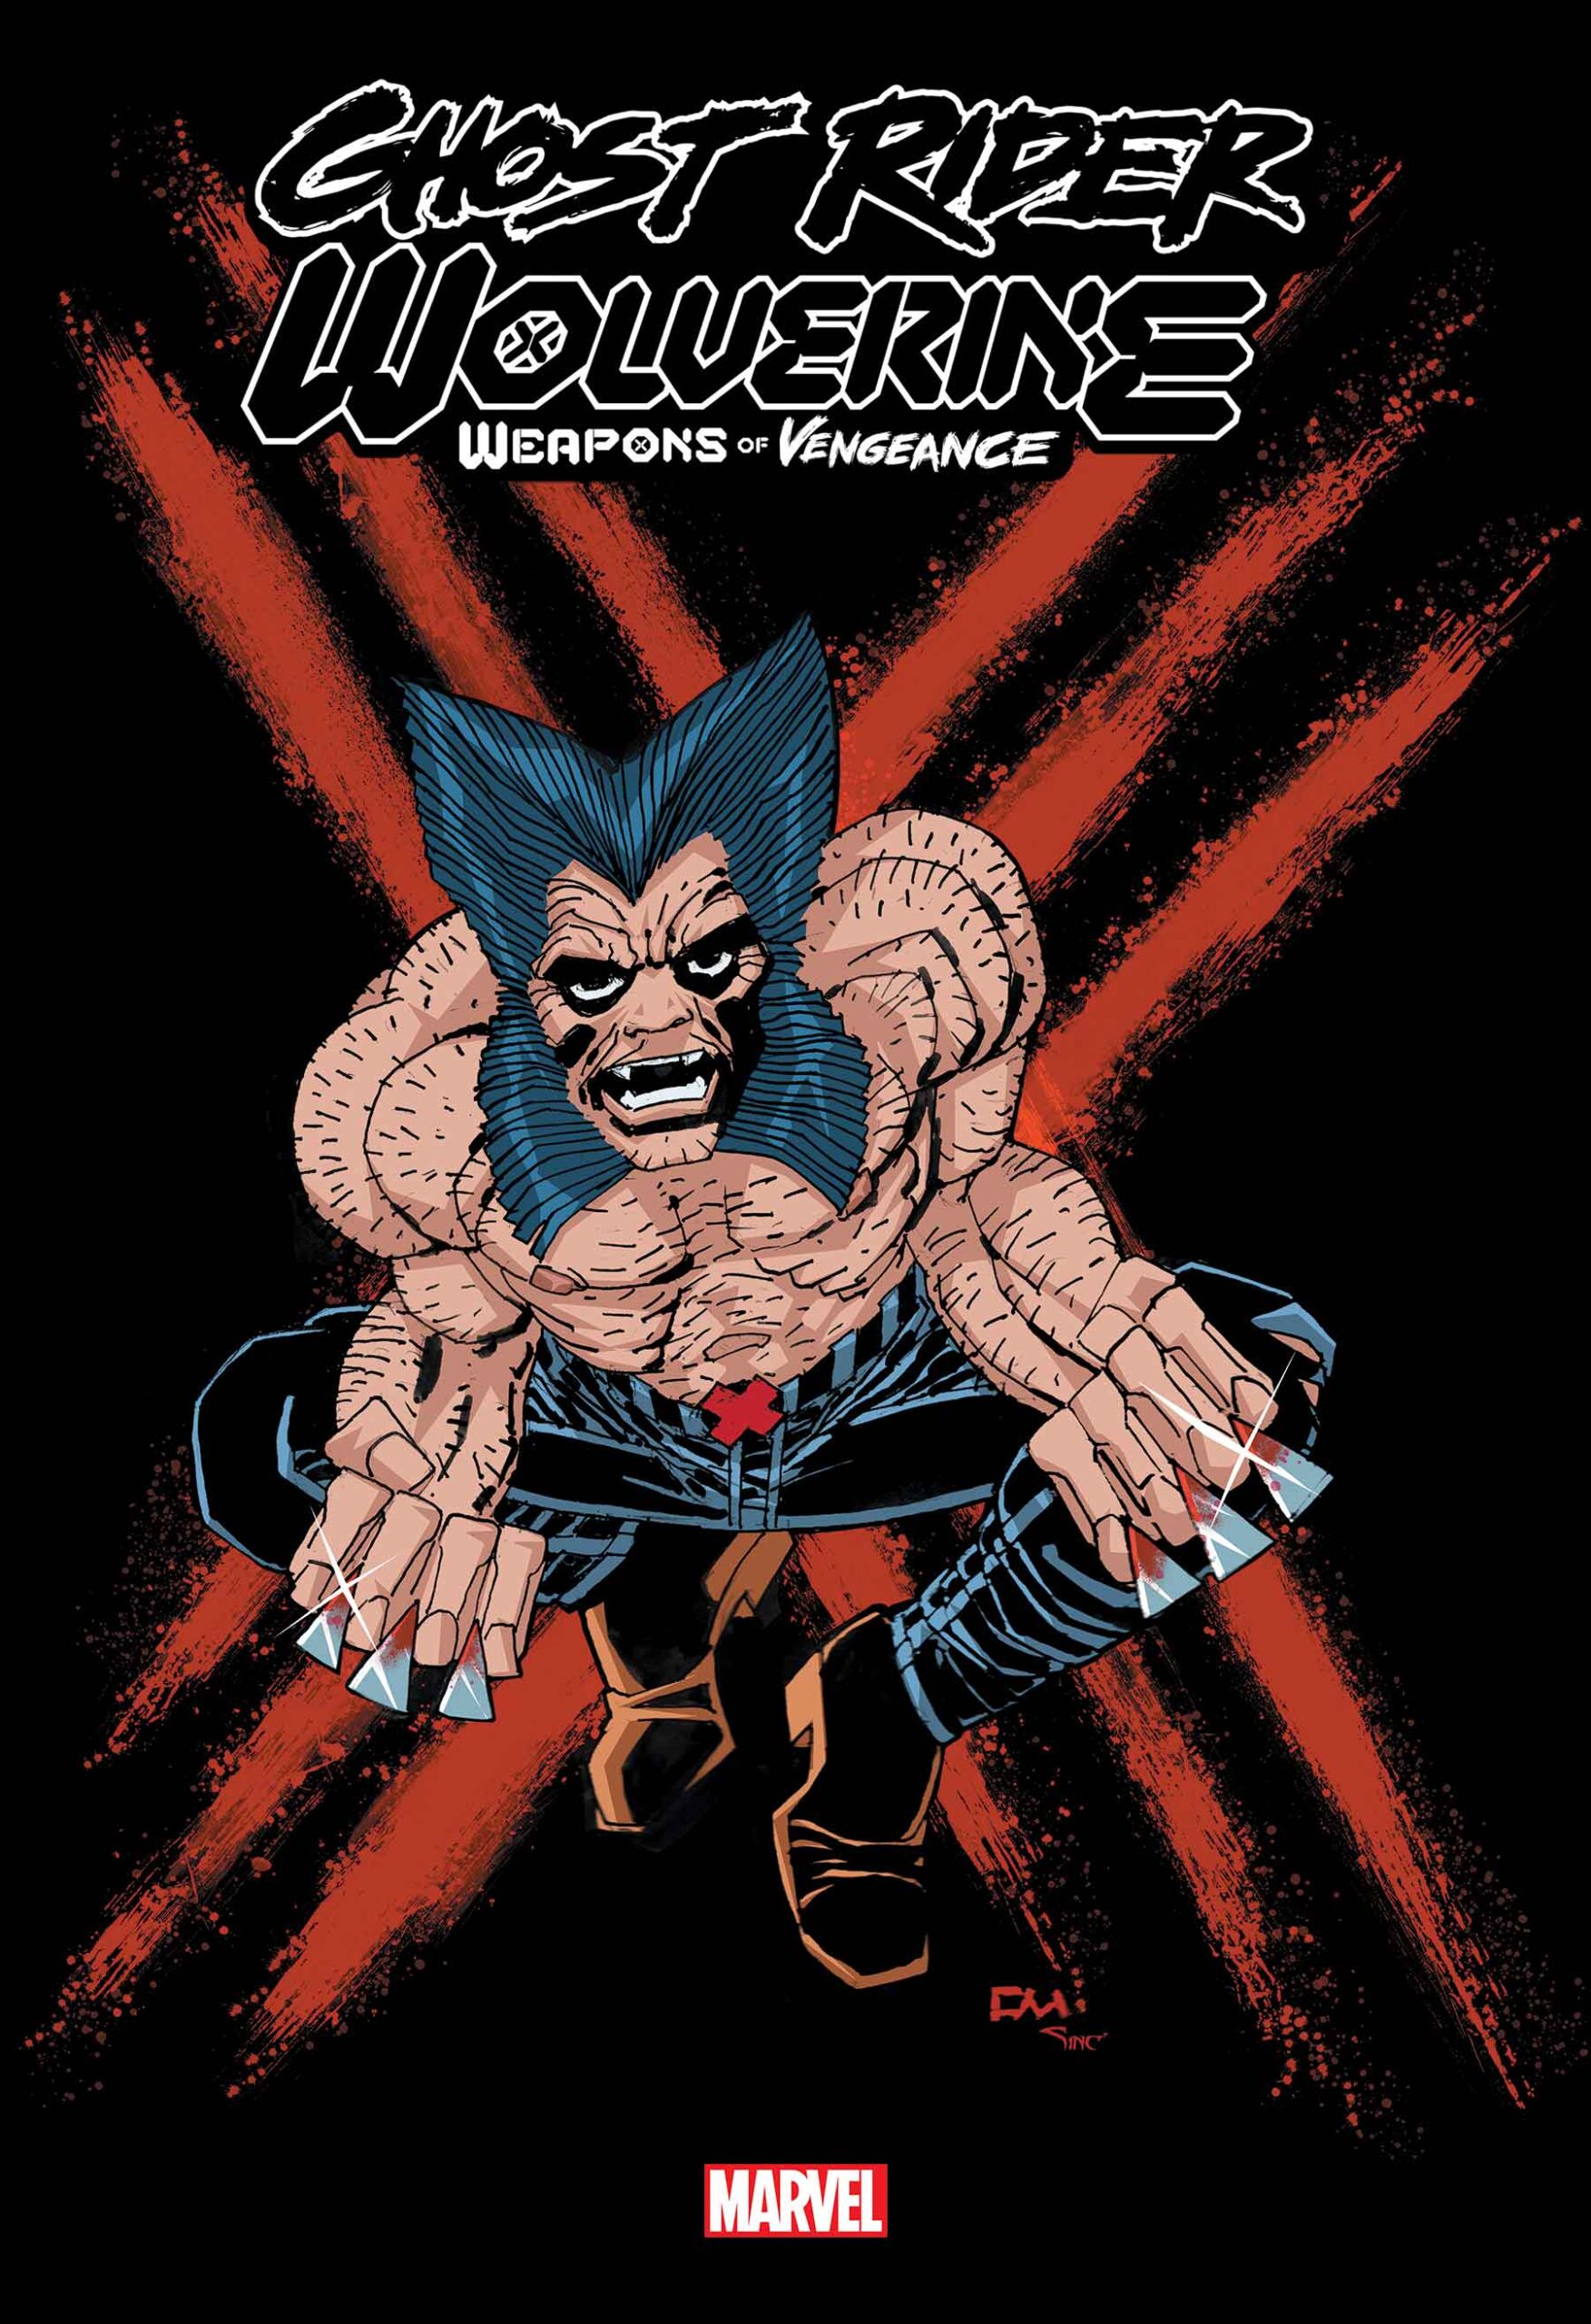 THE LEGENDARY FRANK MILLER RETURNS TO WOLVERINE WITH A NEW COVER FOR ...